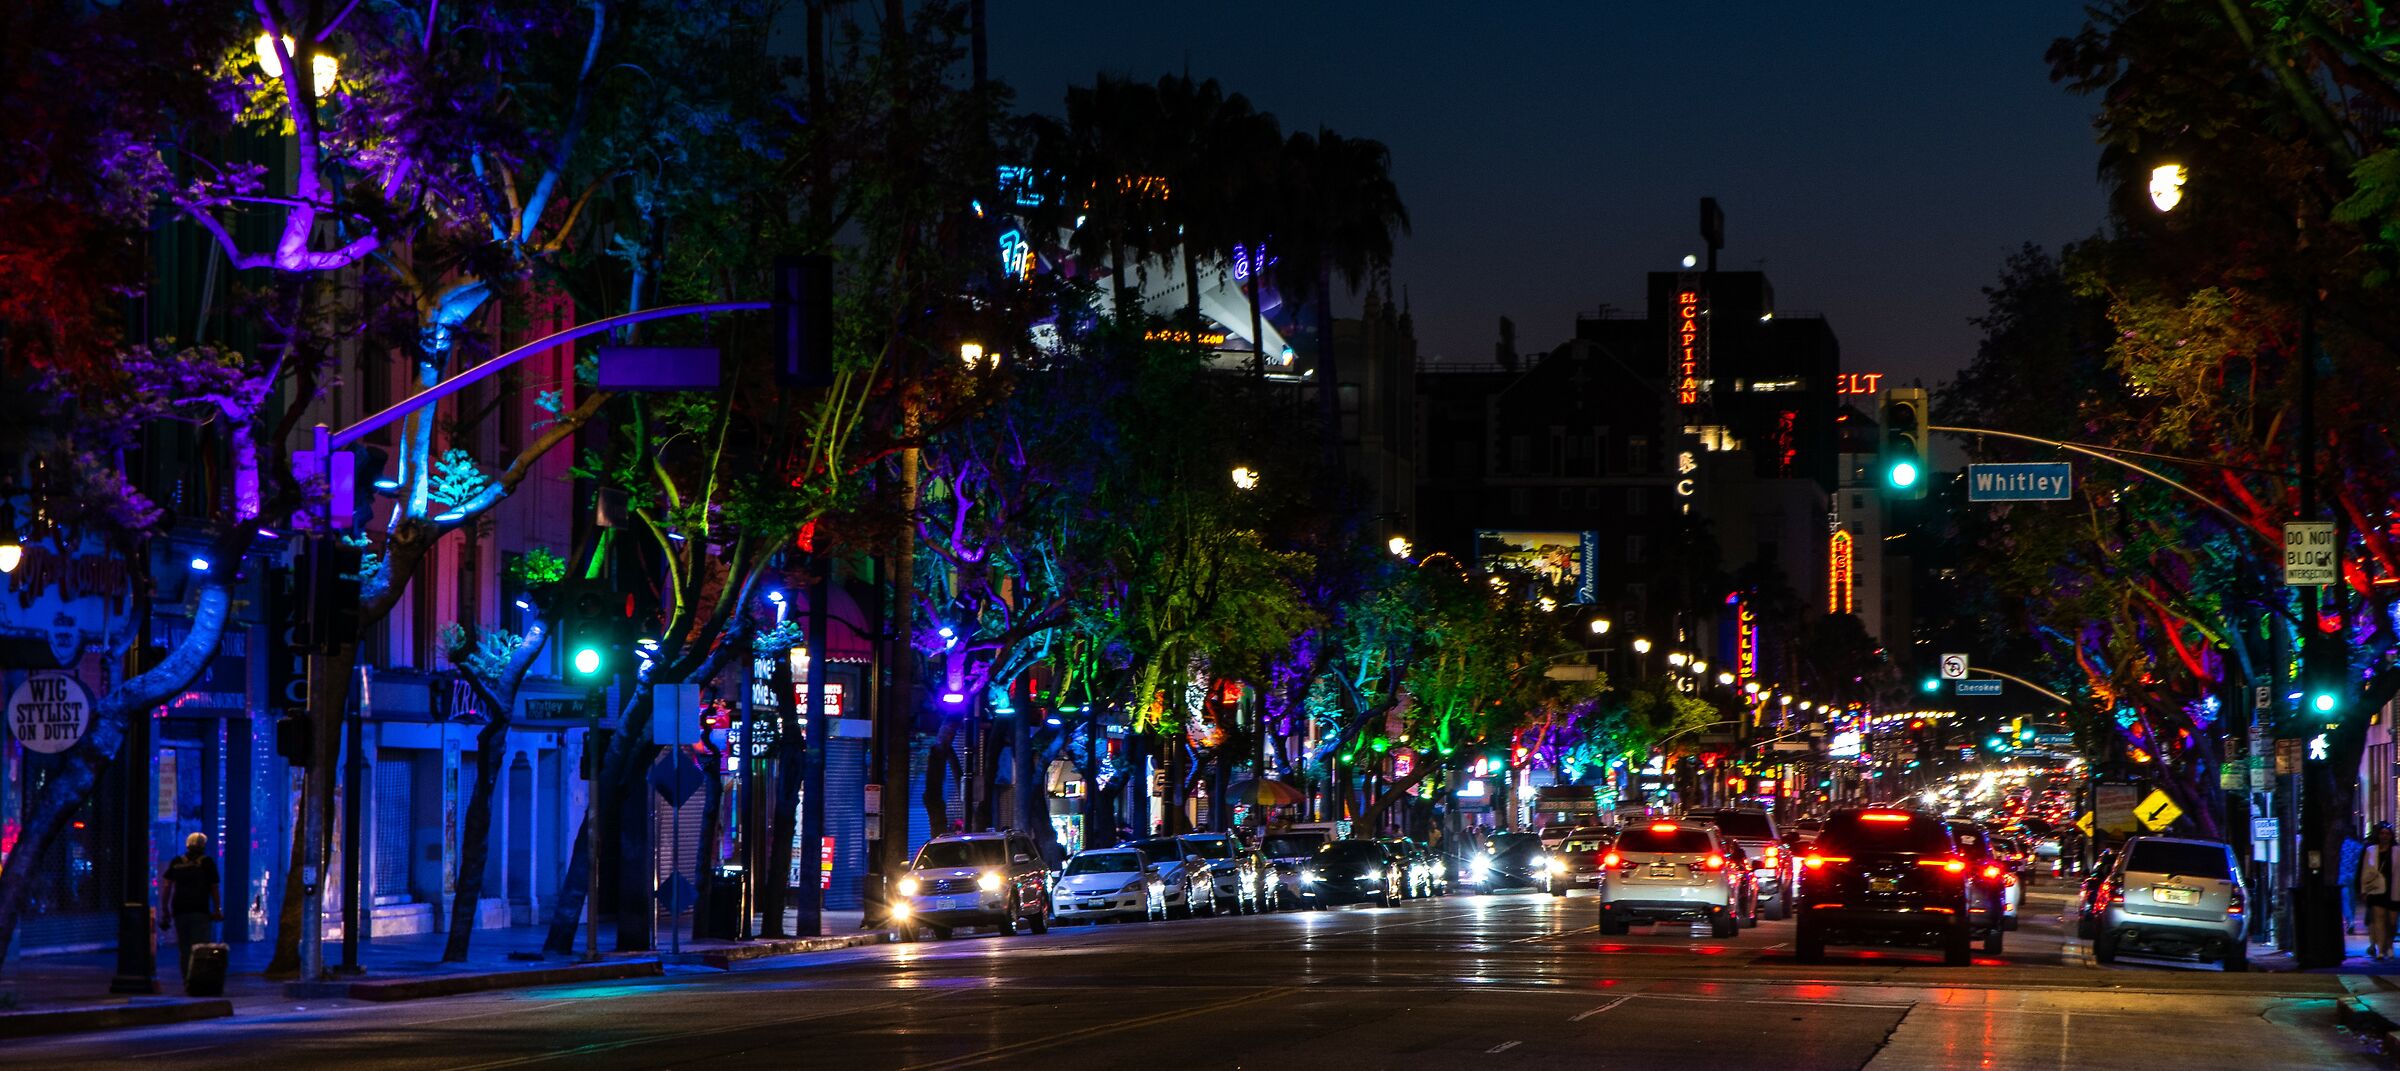 The Lights of Hollywood Boulevard...